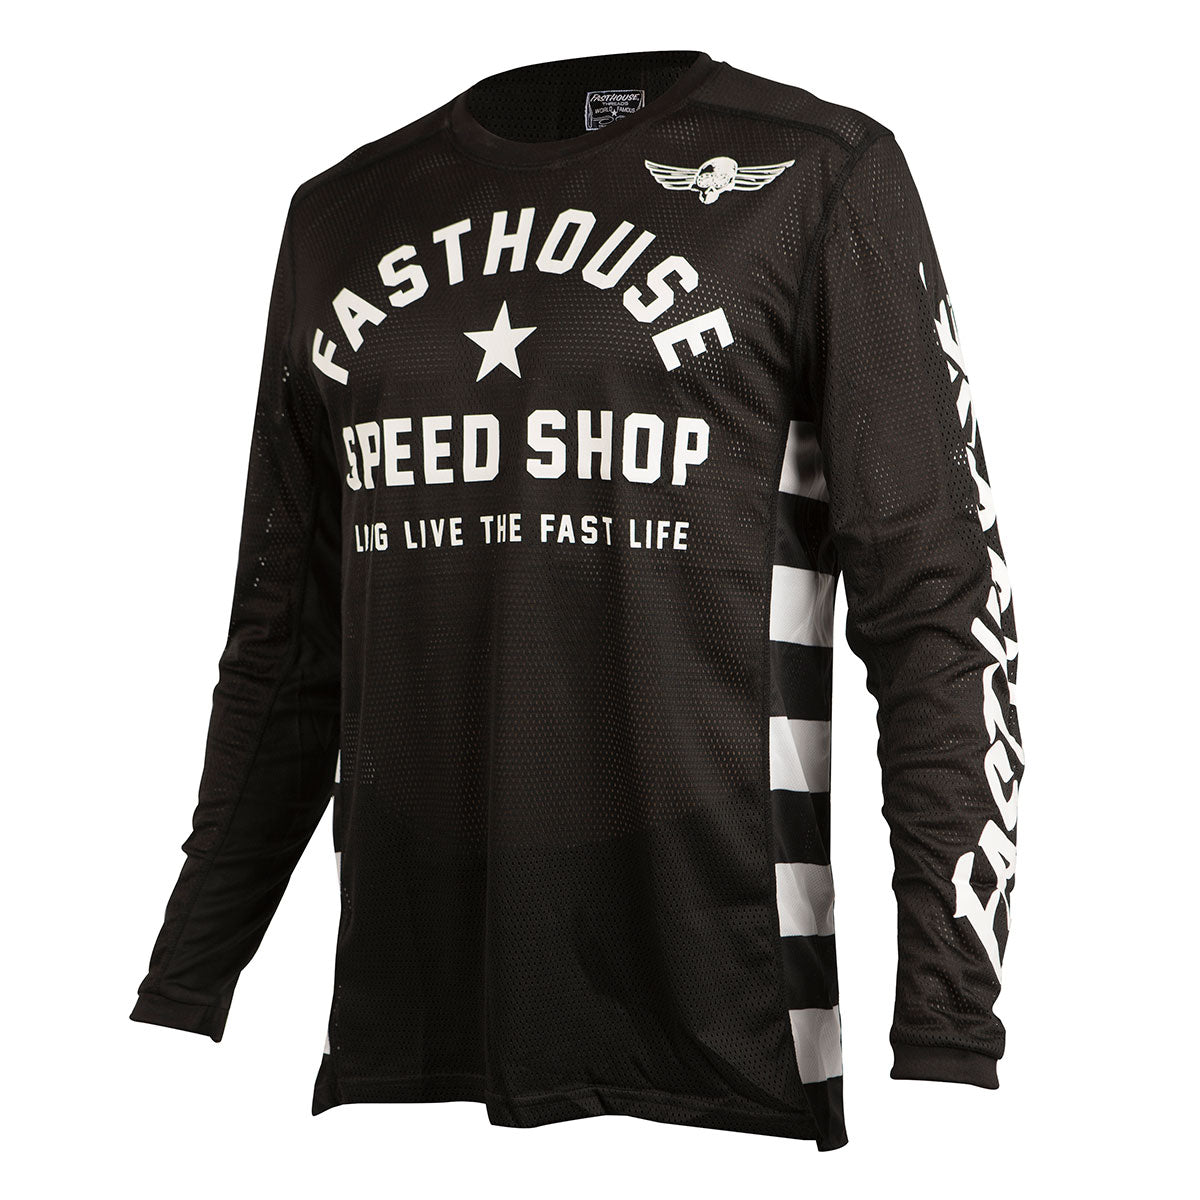 Fasthouse - Originals Air Cooled L1 Jersey - Black